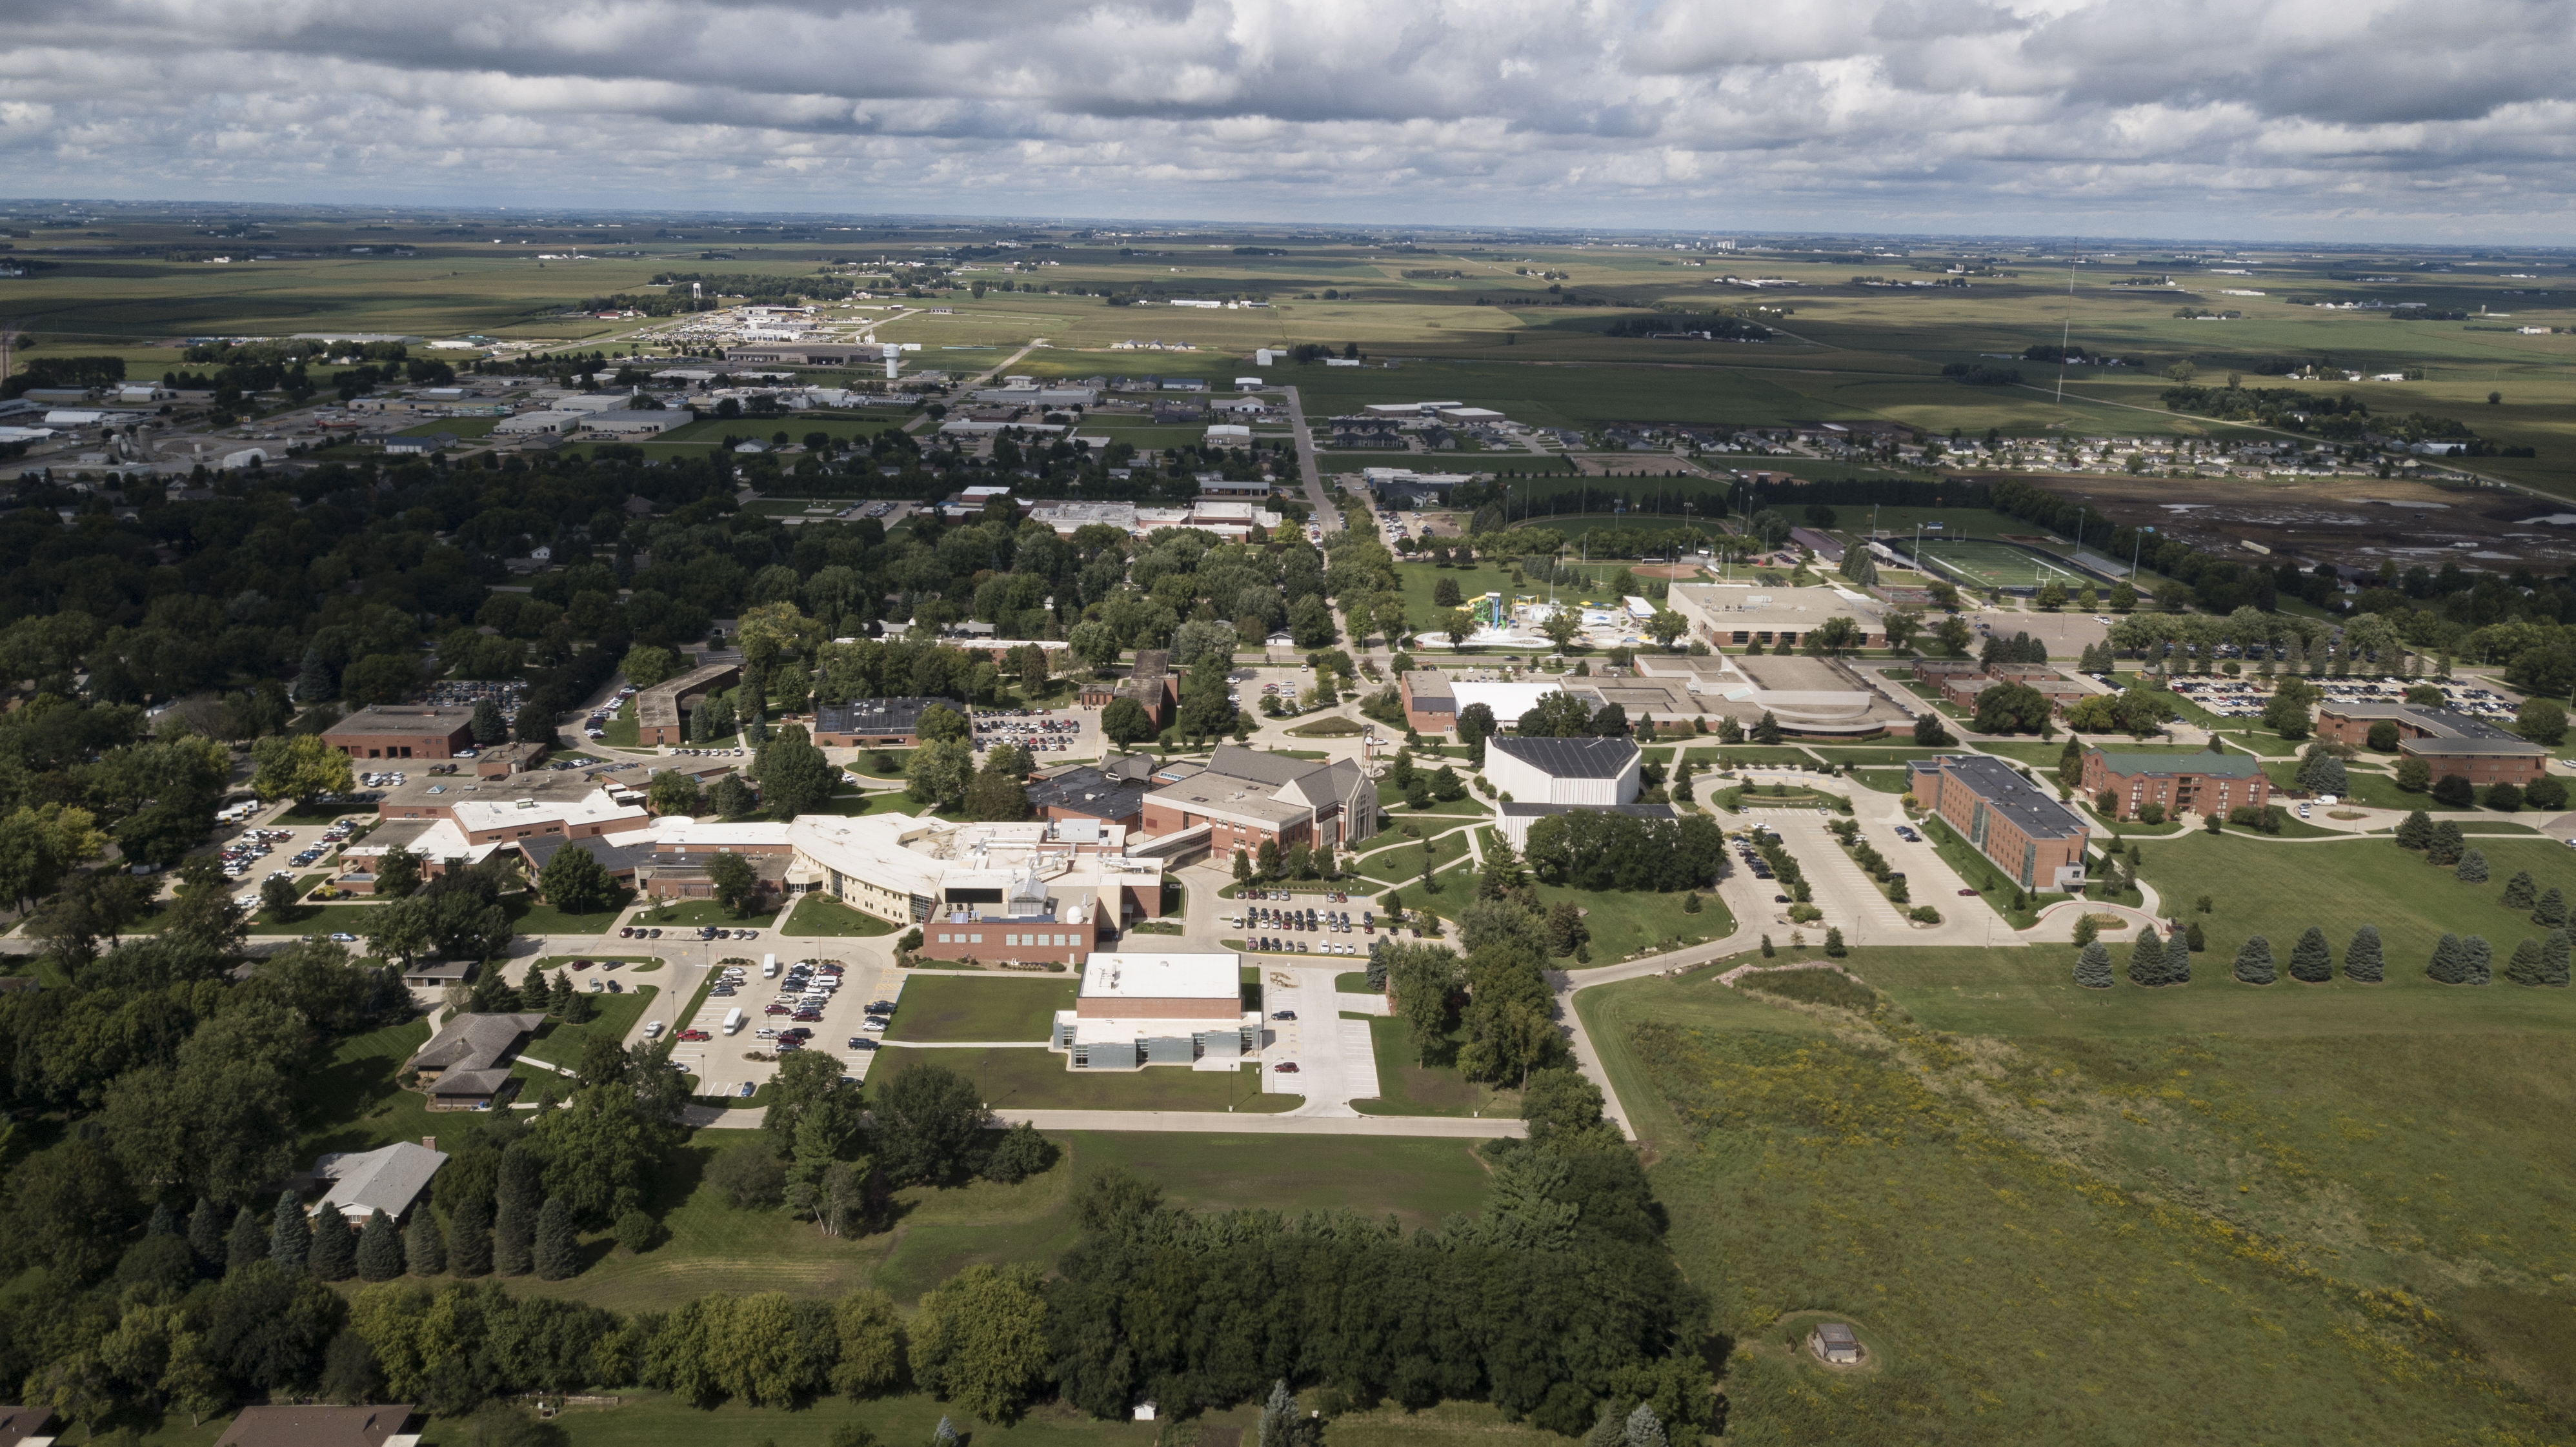 An aerial view of Dordt's campus